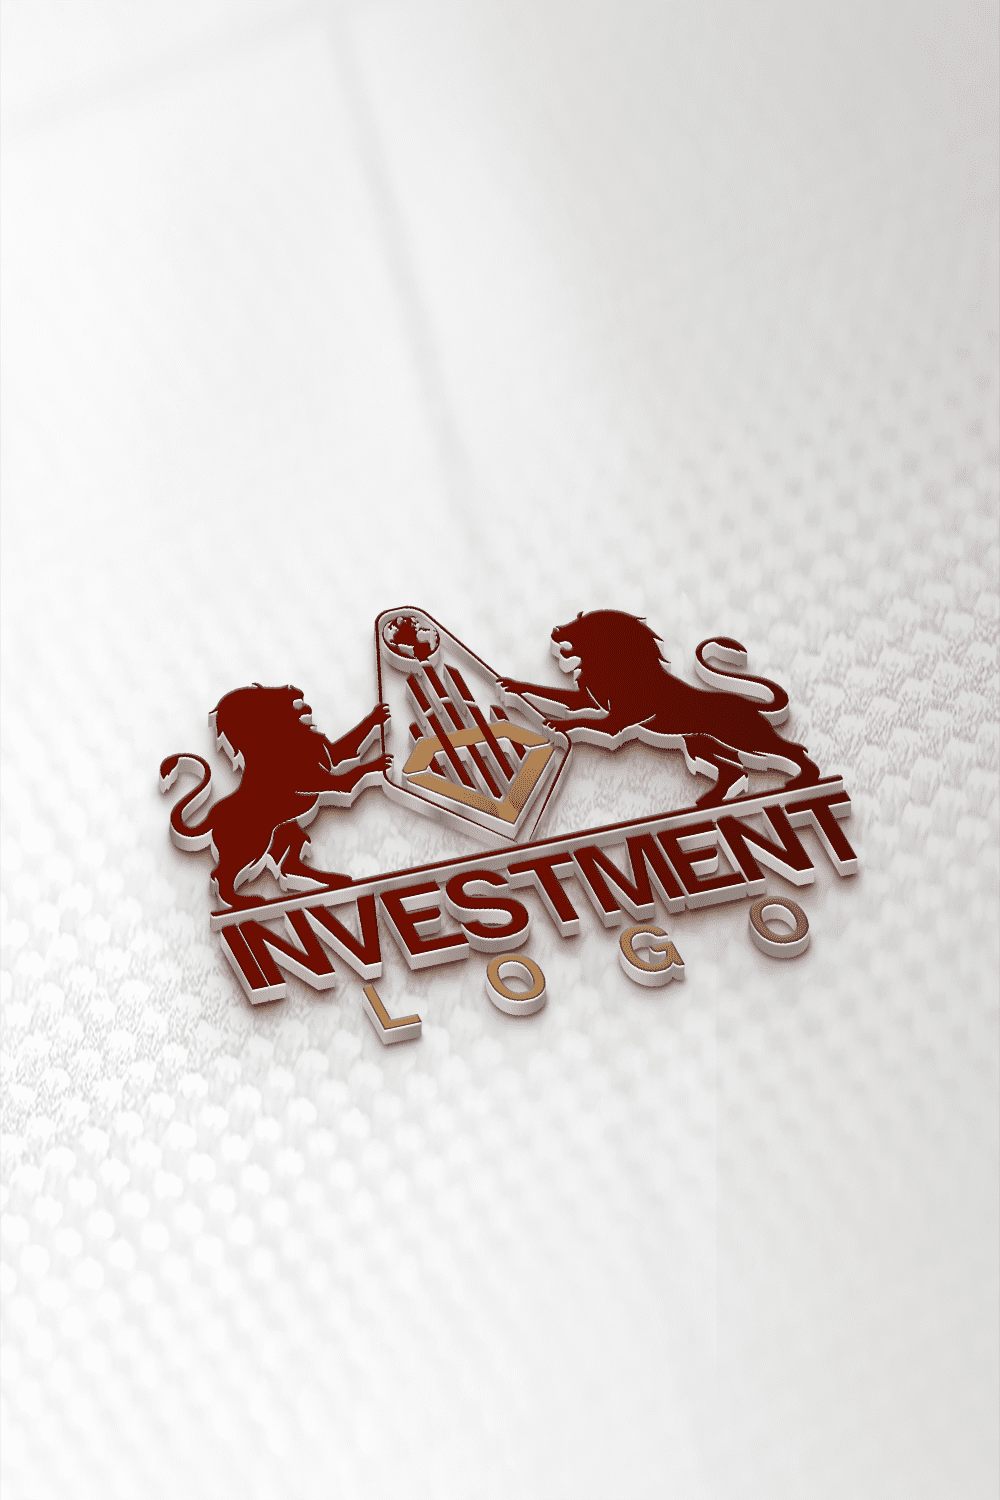 Investment company logo pinterest preview image.